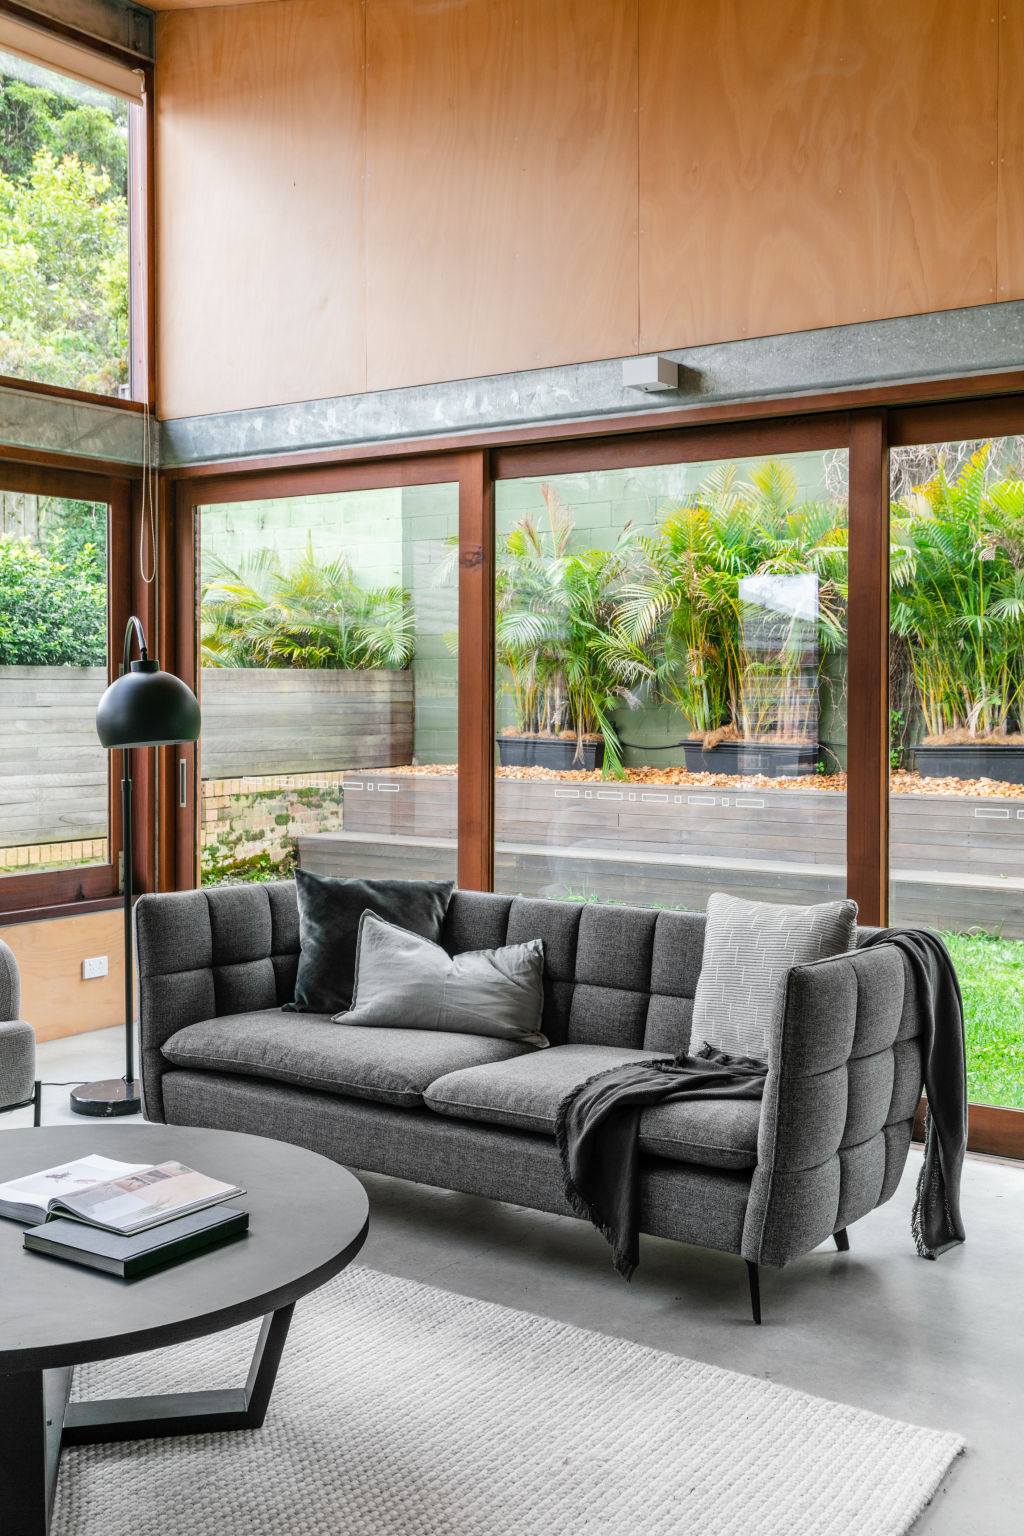 'The open-plan living area, which is level with the backyard, has a really nice indoor-outdoor flow,' Walters says. Photo: Moss & co